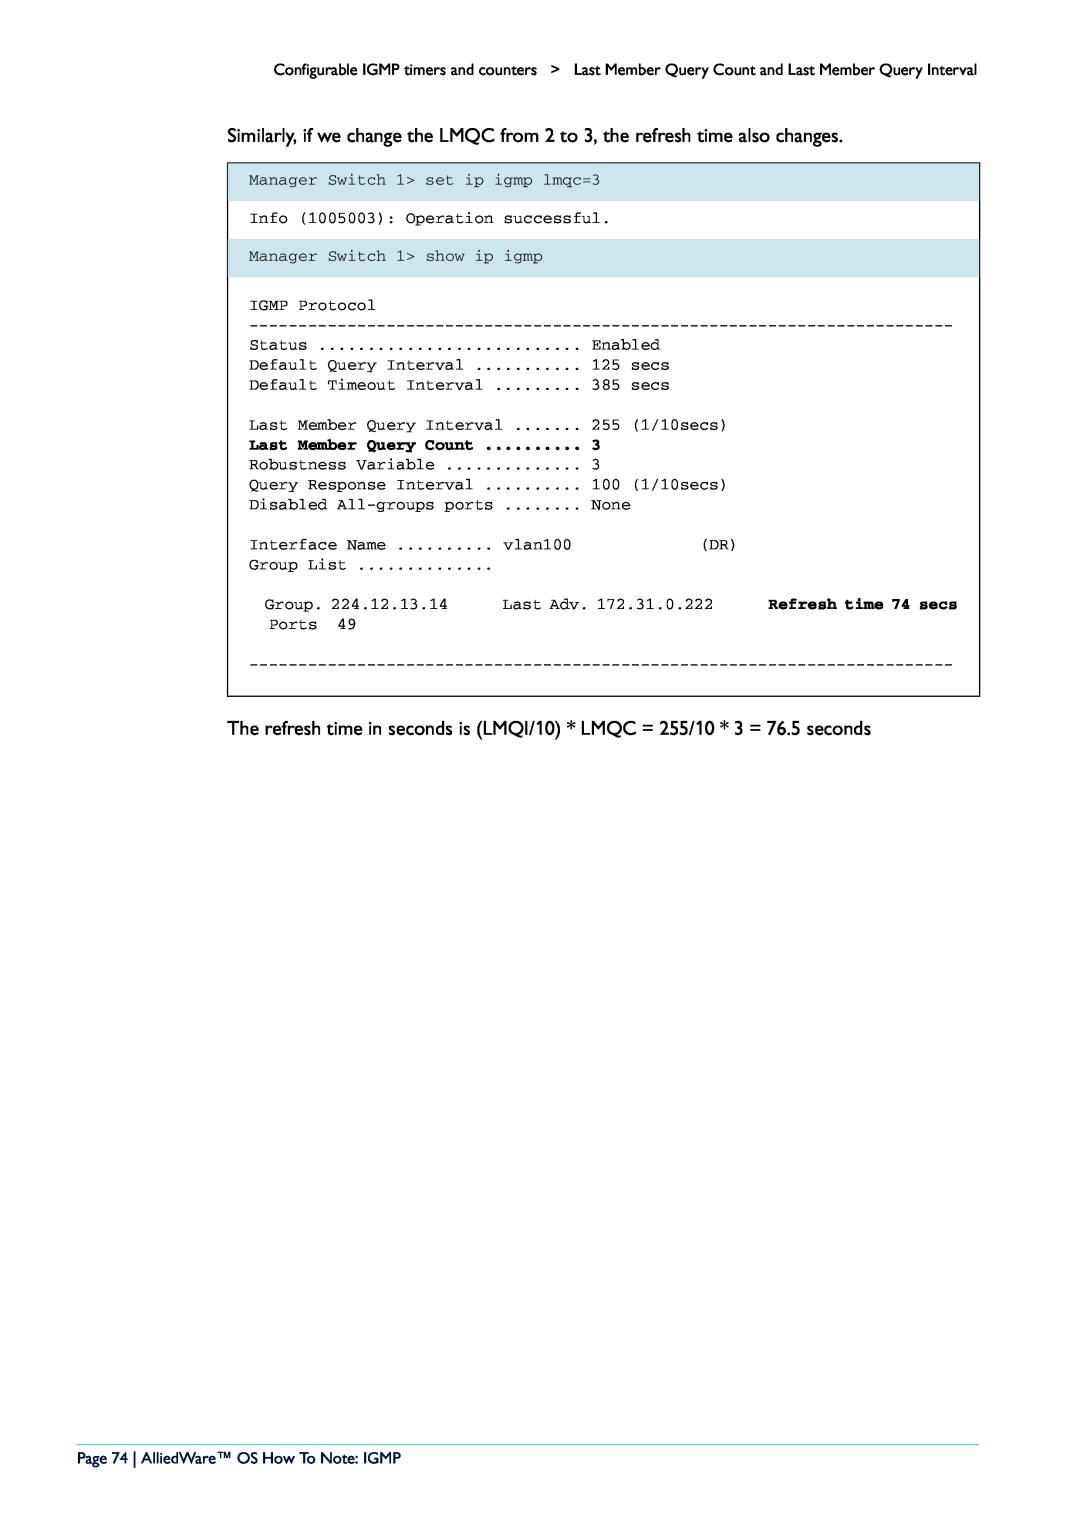 Allied Telesis AR400 manual Last Member Query Count, Page 74 AlliedWare OS How To Note IGMP 